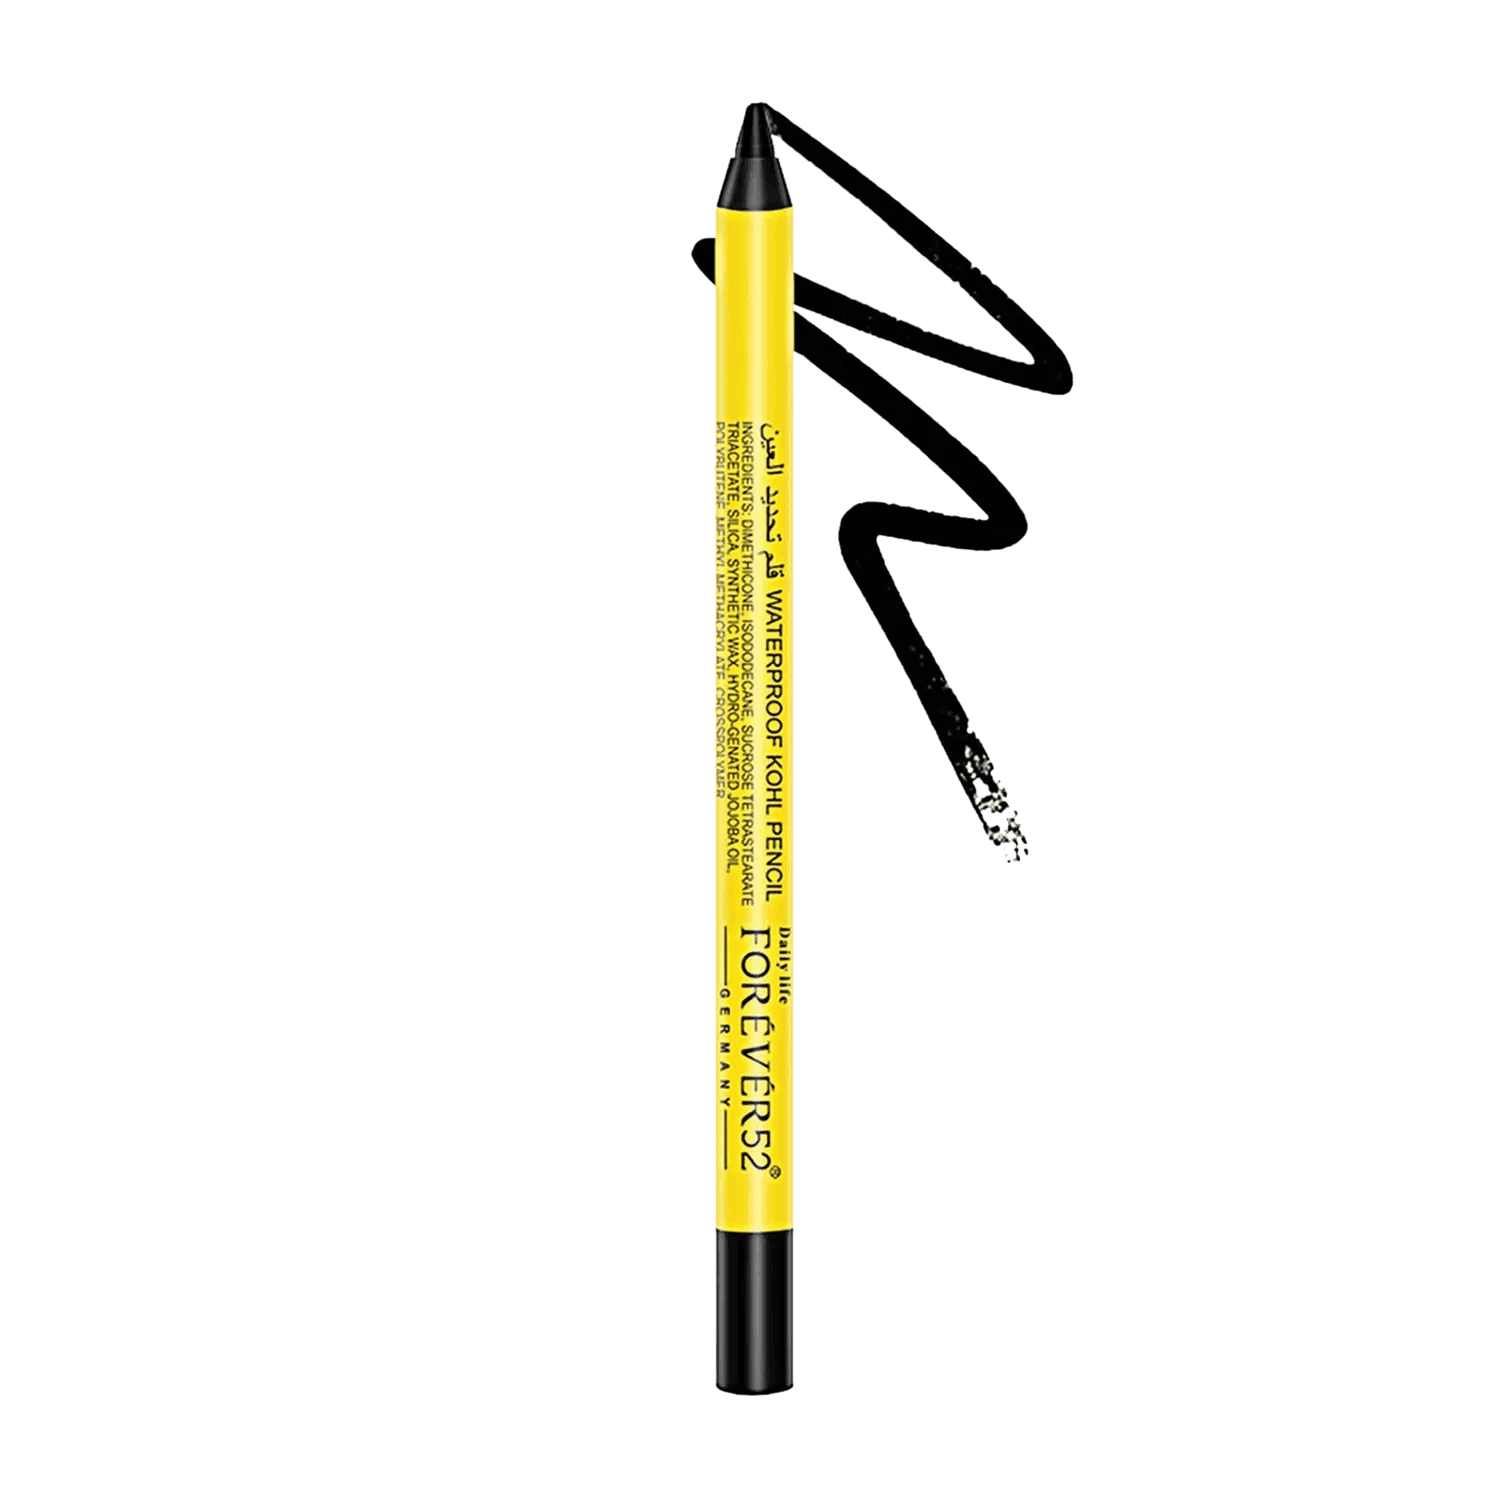 daily life forever52 waterproof kohl pencil kwp001 (1gm)